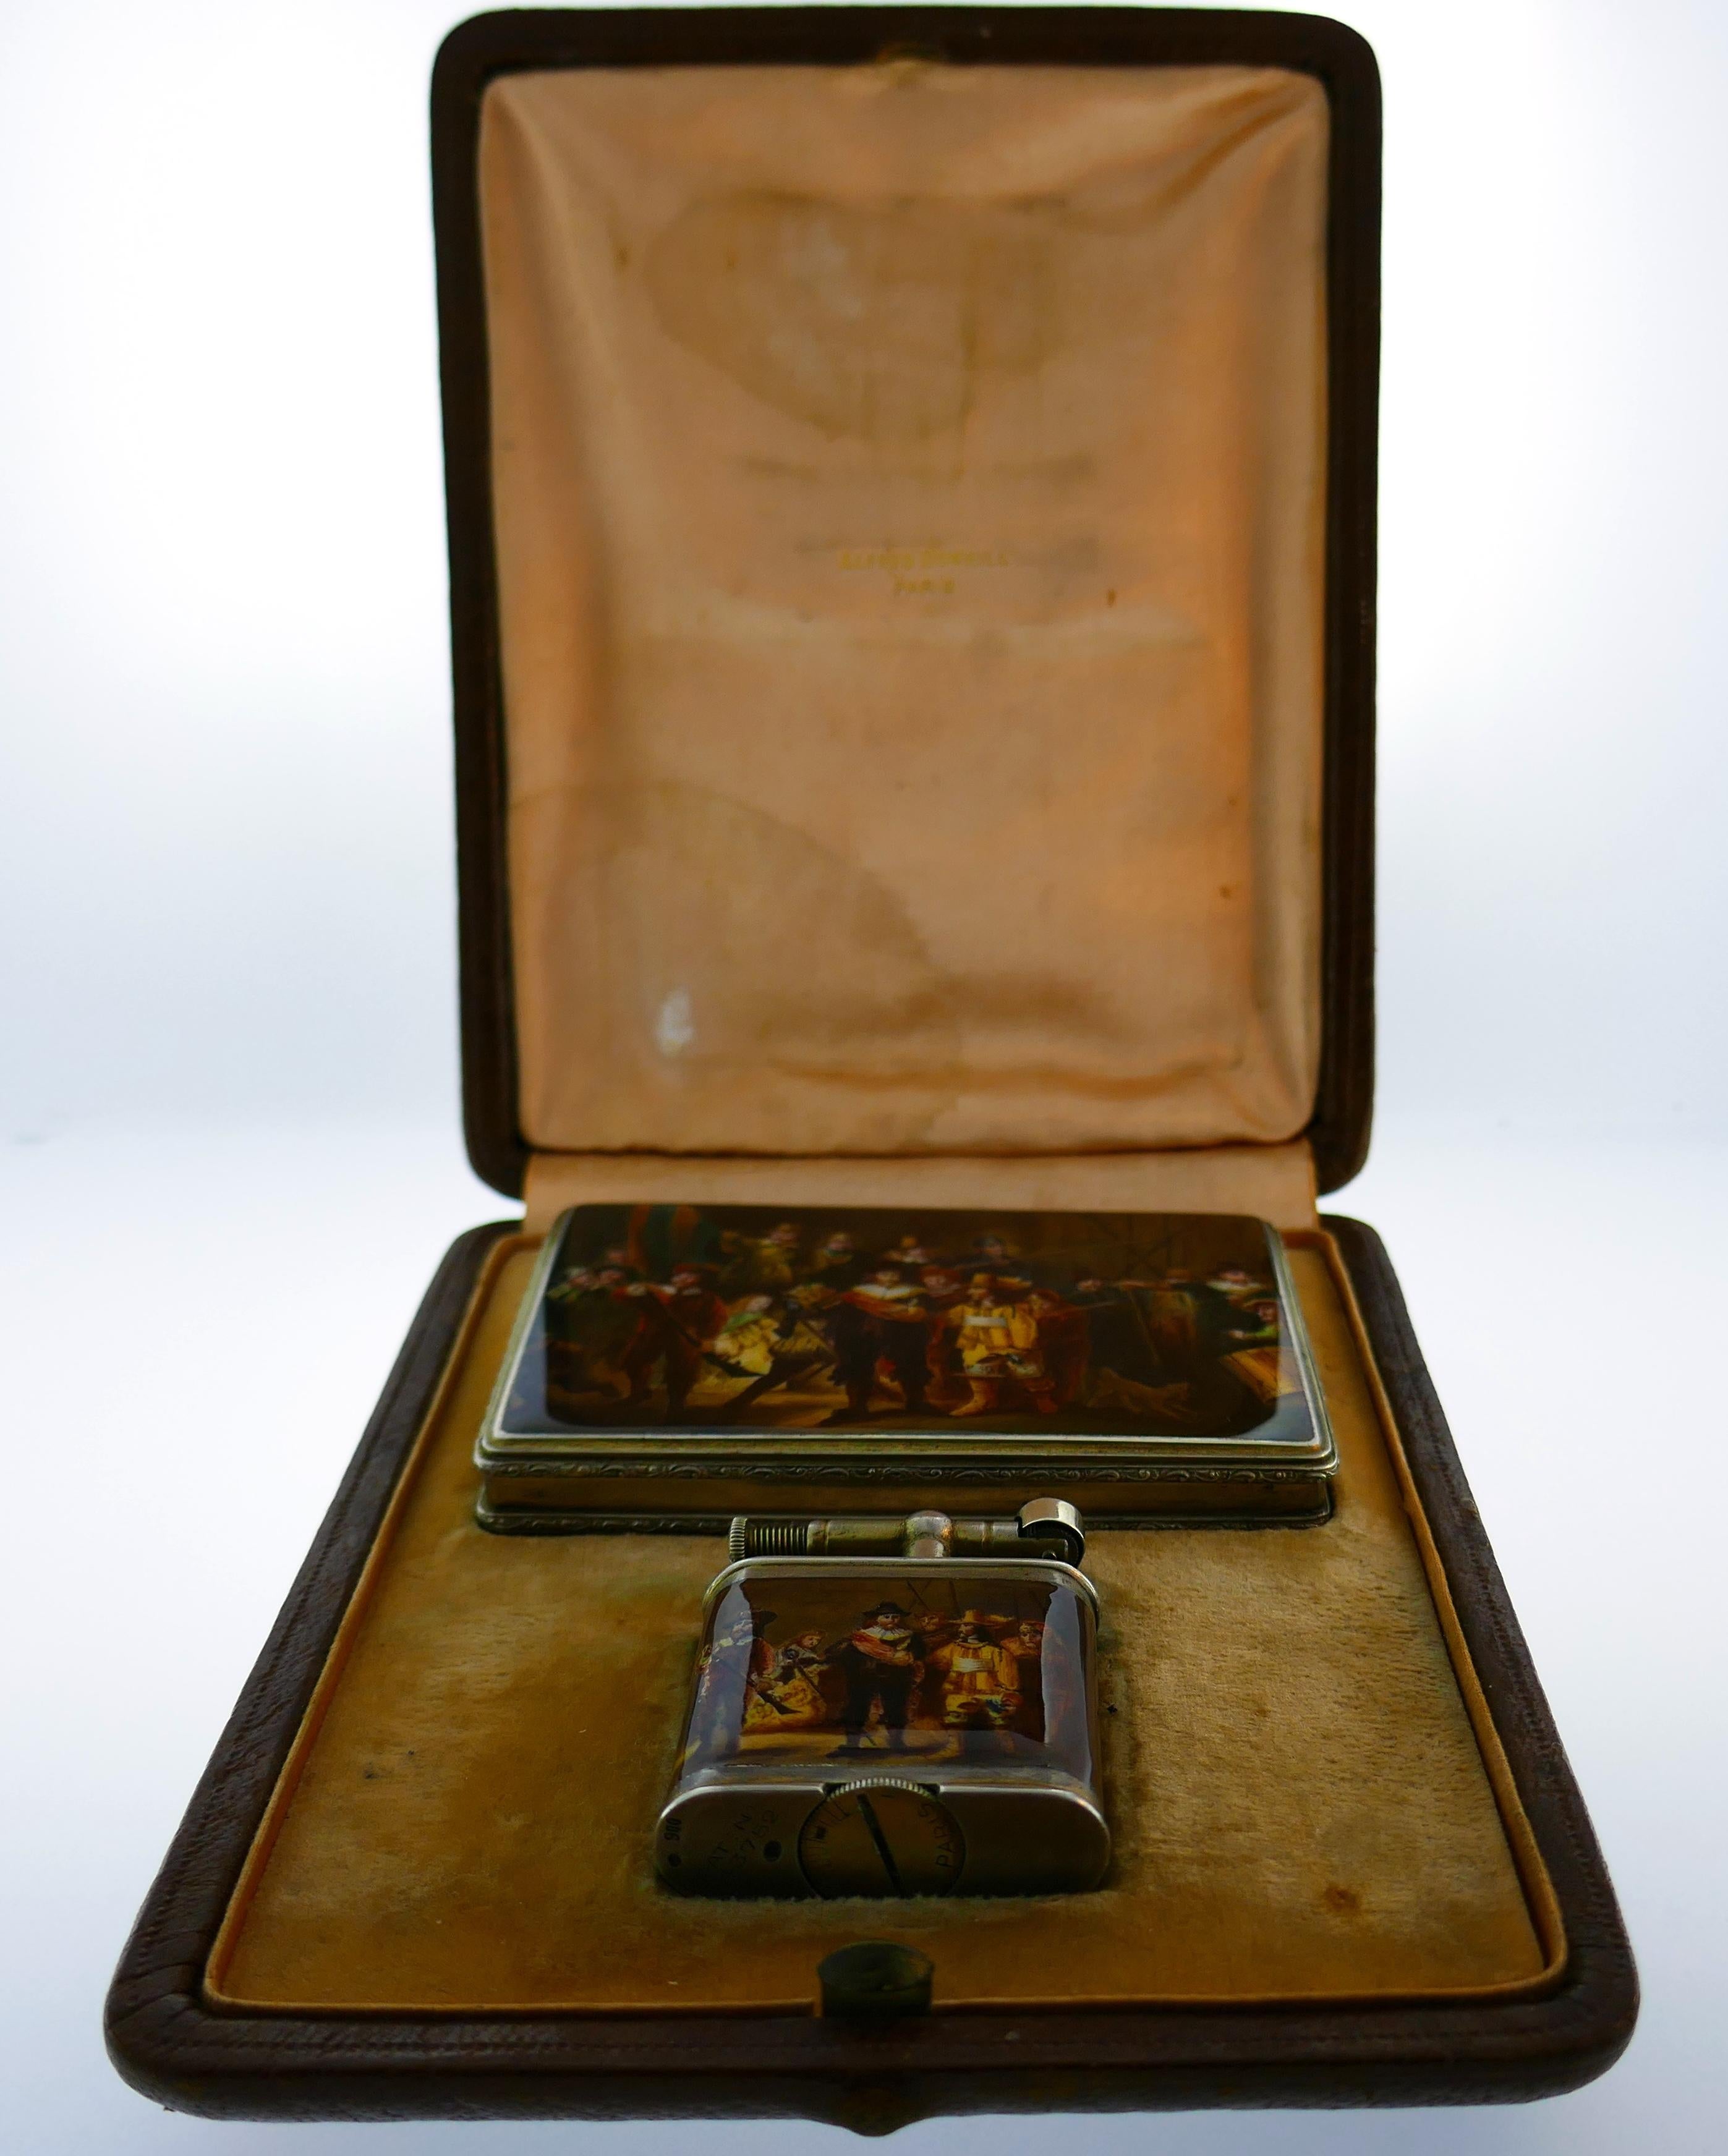 Amazing set consisting of a lighter and a cigarette case created by Alfred Dunhill. The set is made of sterling silver and decorated with multicolored enamel. It depicts a life scene of noble European society. Museum quality multilevel hand-painted